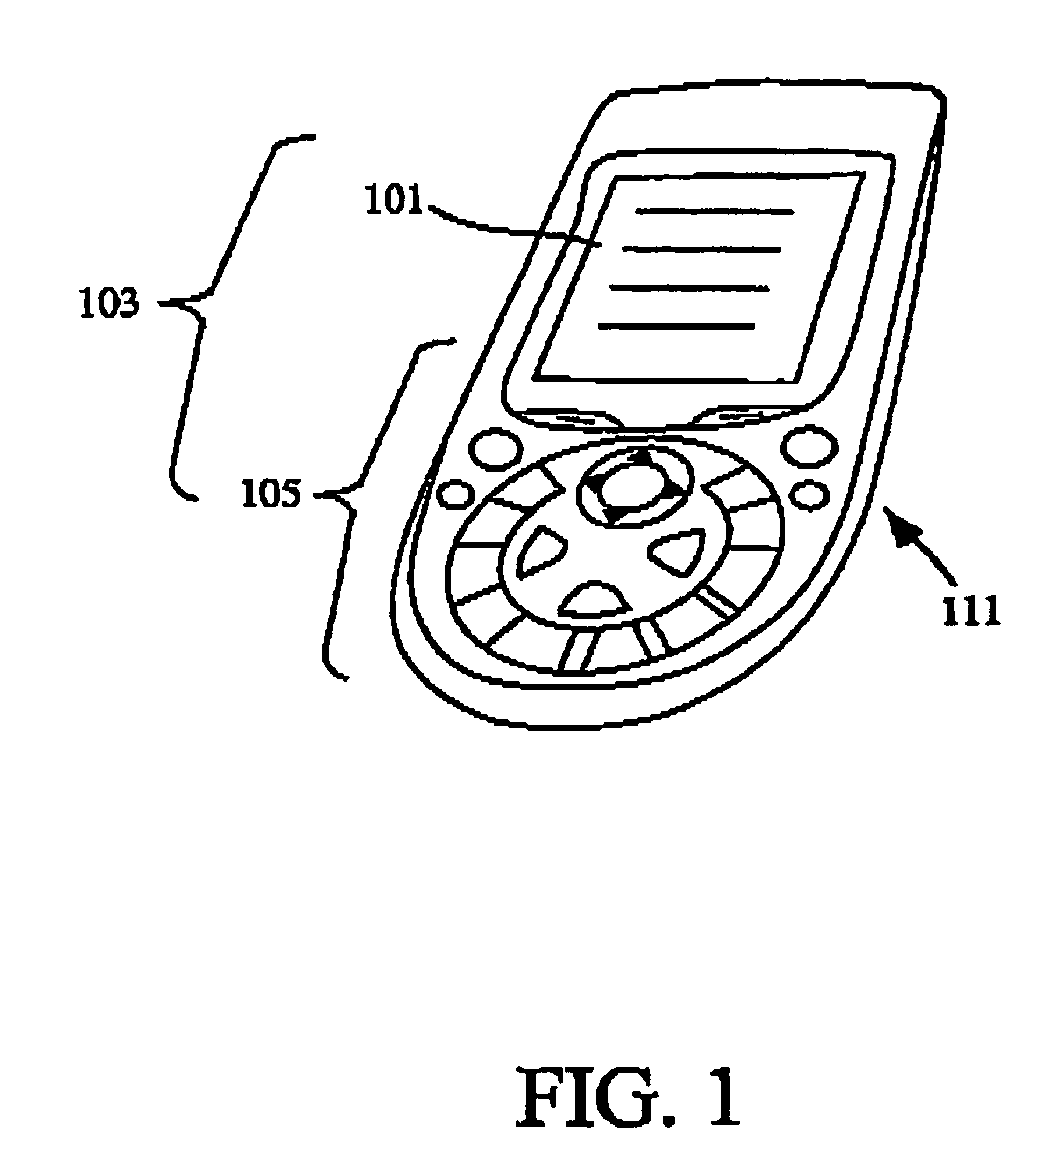 Spatially associated personal reminder system and method